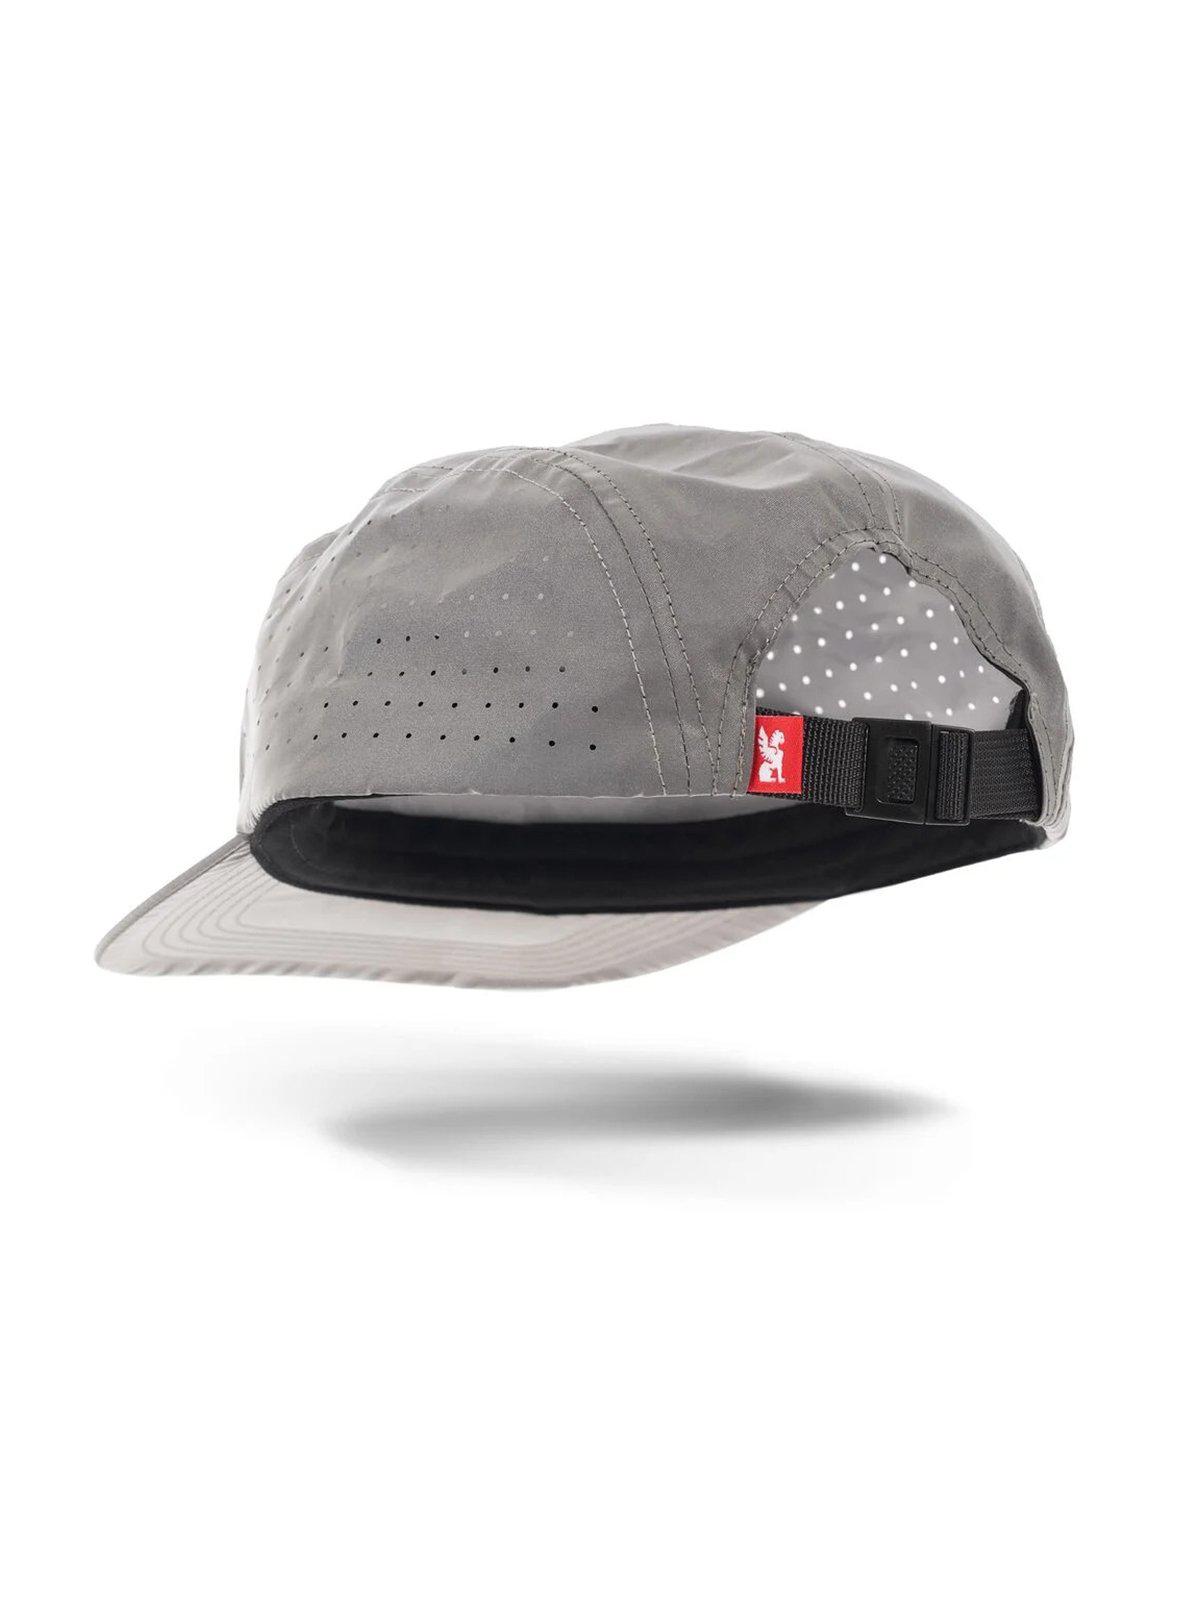 Chrome Industries 5 Panel Hat Reflective